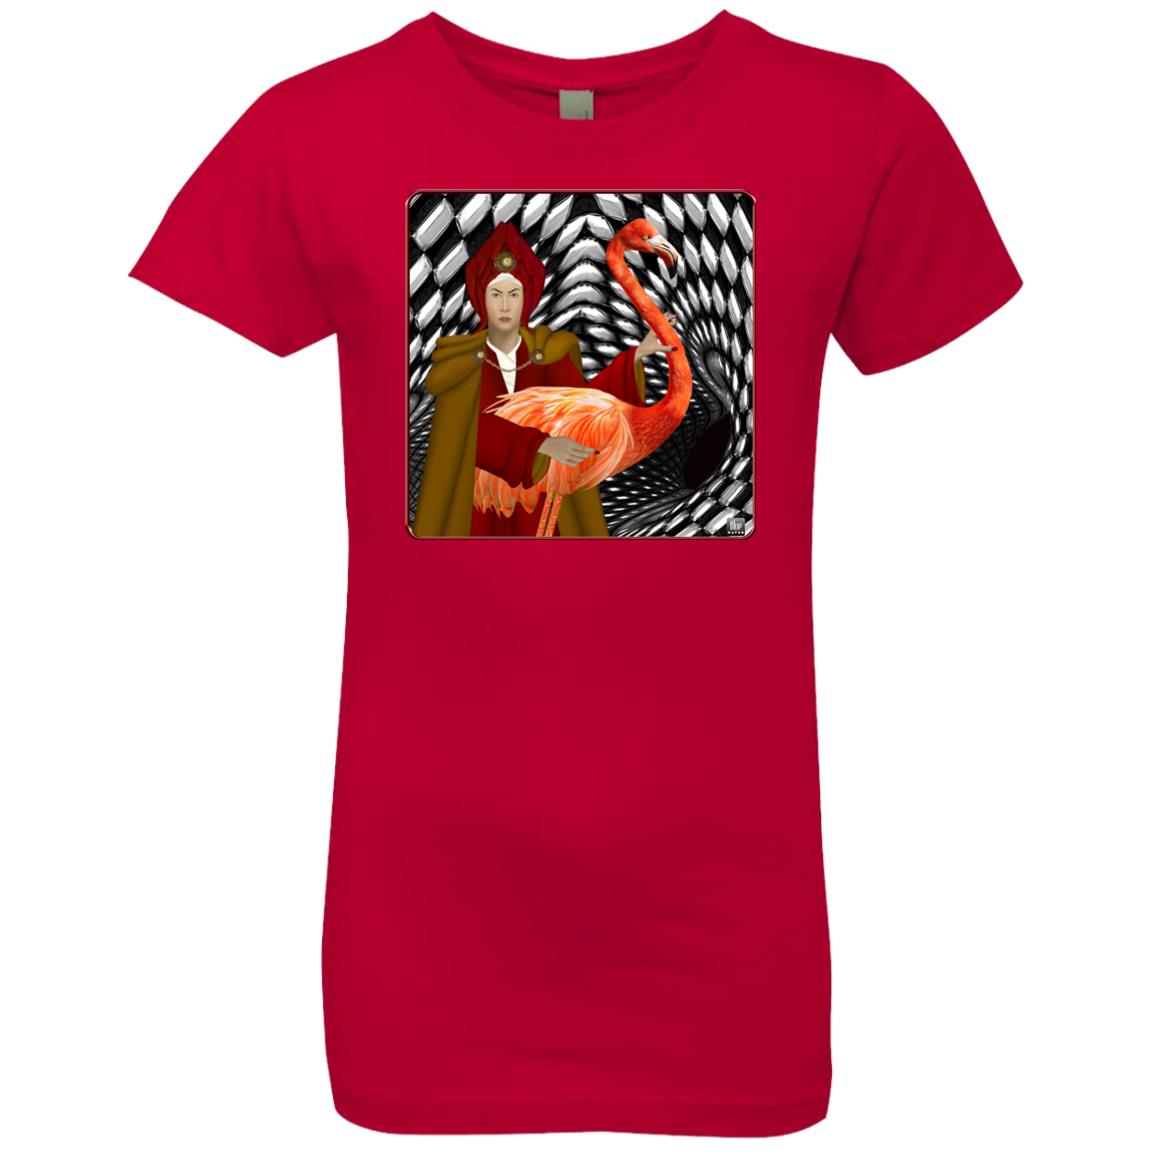 THE RED QUEEN with the flamingo - Girl's Premium Cotton T-Shirt